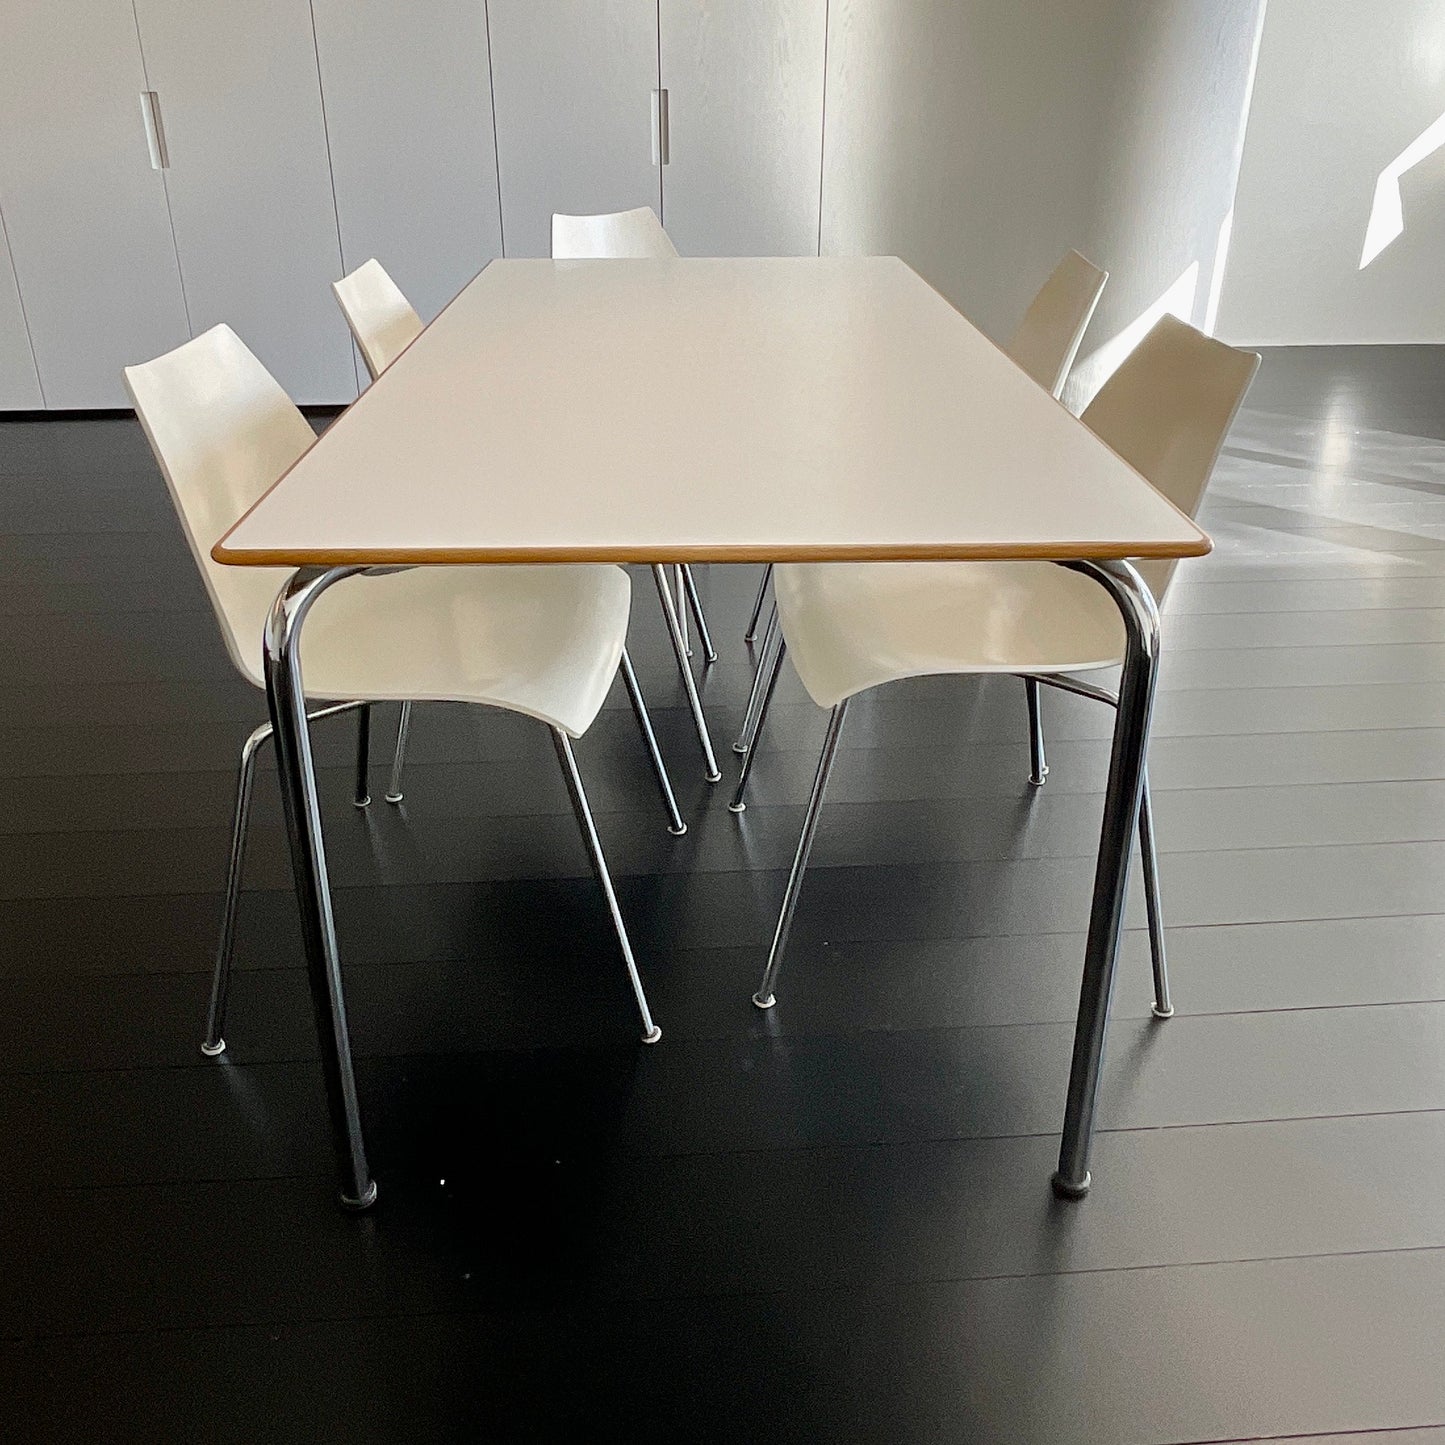 Load image into Gallery viewer, Maui Table by Vico Magistretti for Kartell
